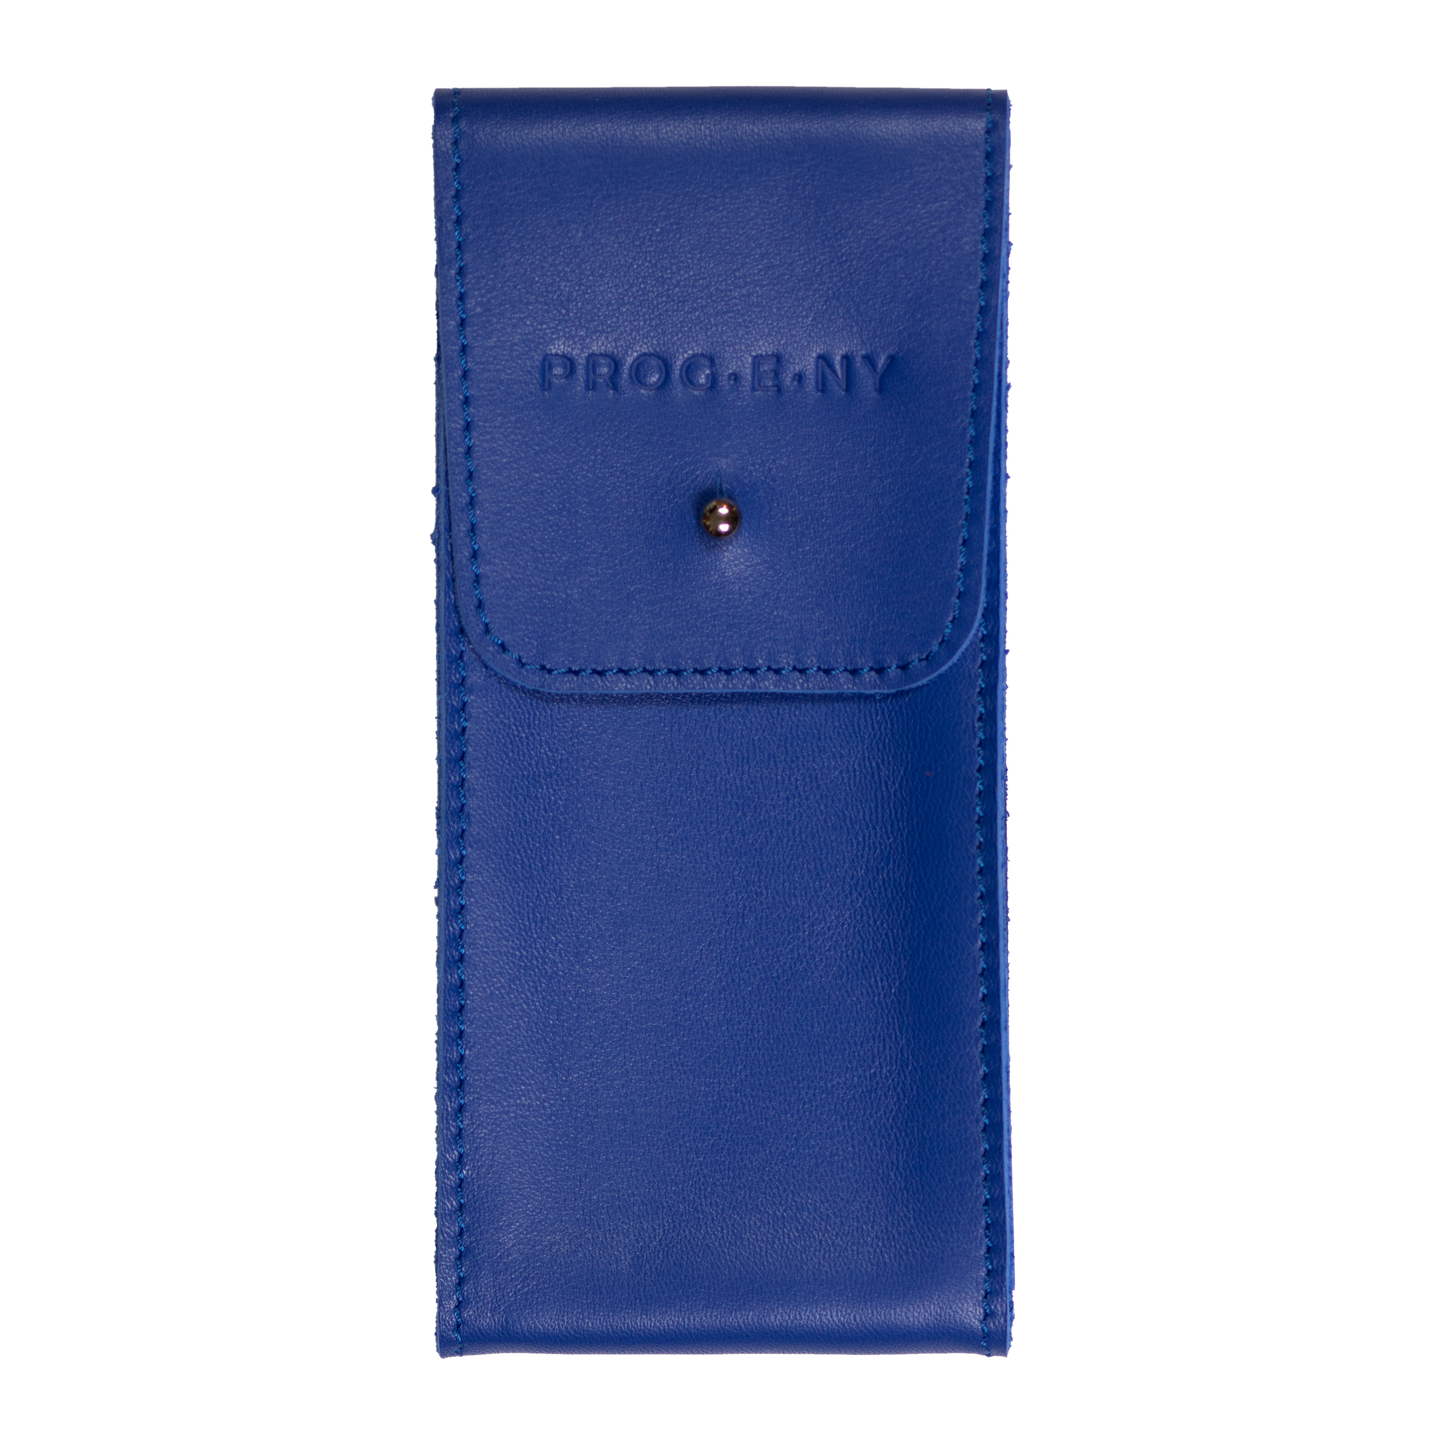 Watch Pouch - Nappa Leather